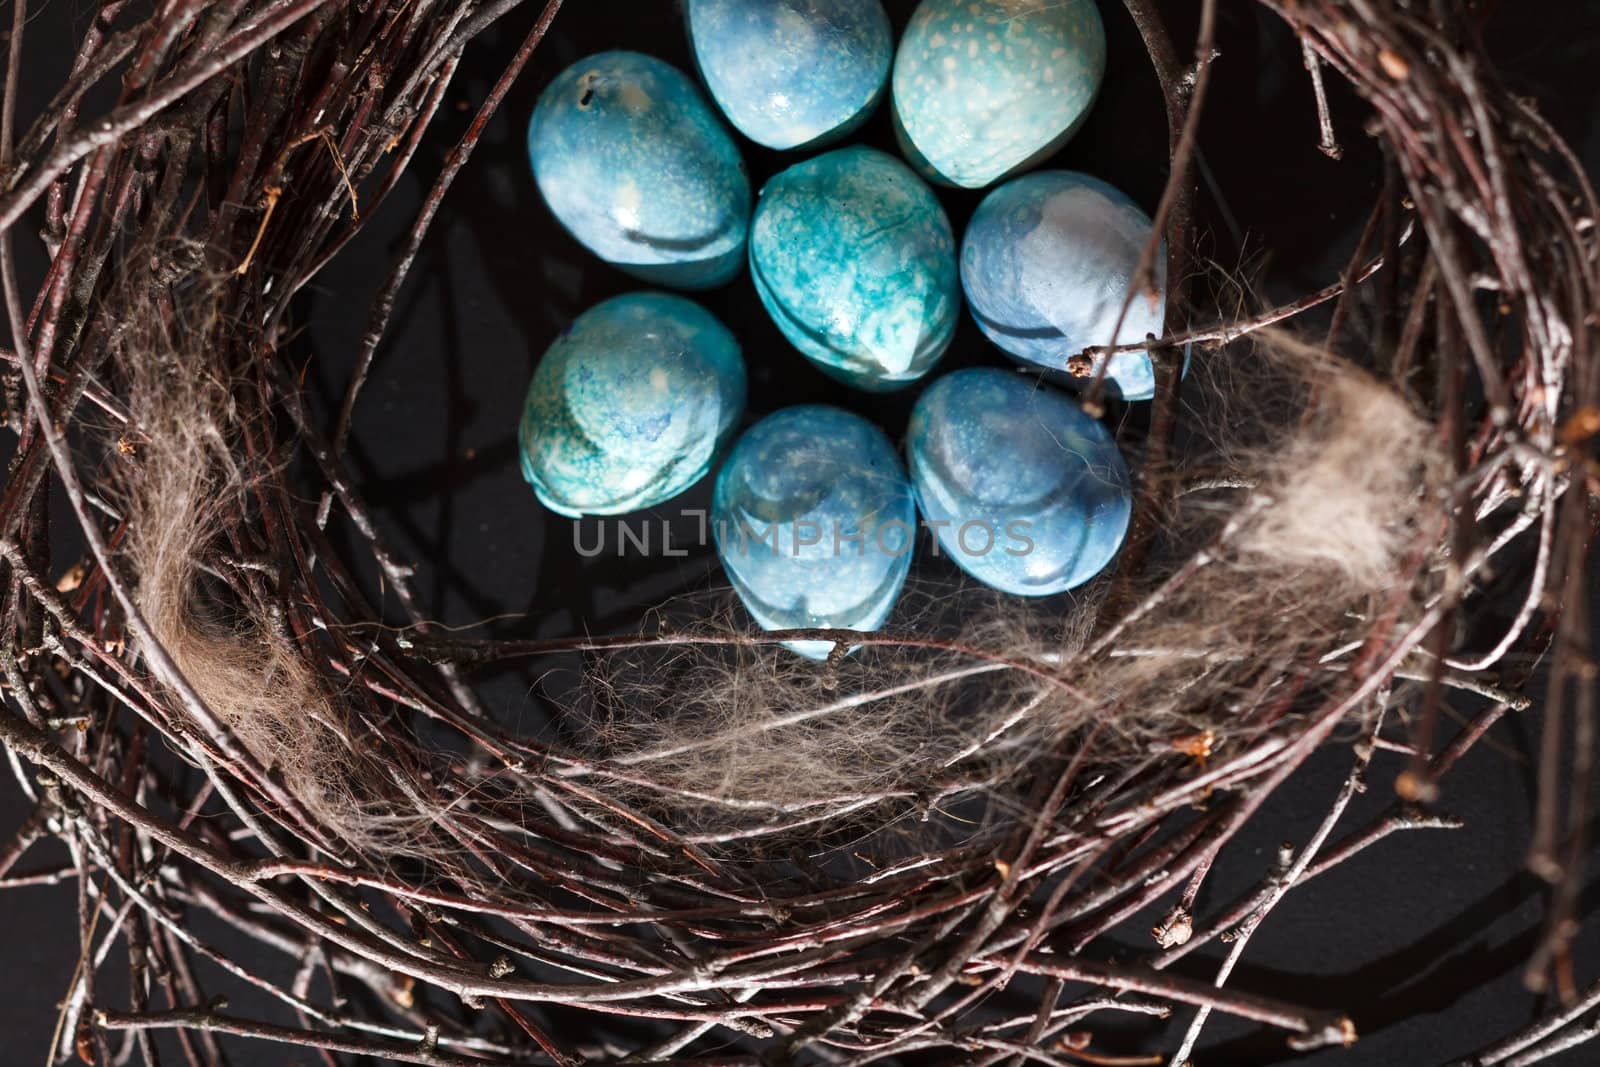 blue eggs in the nest